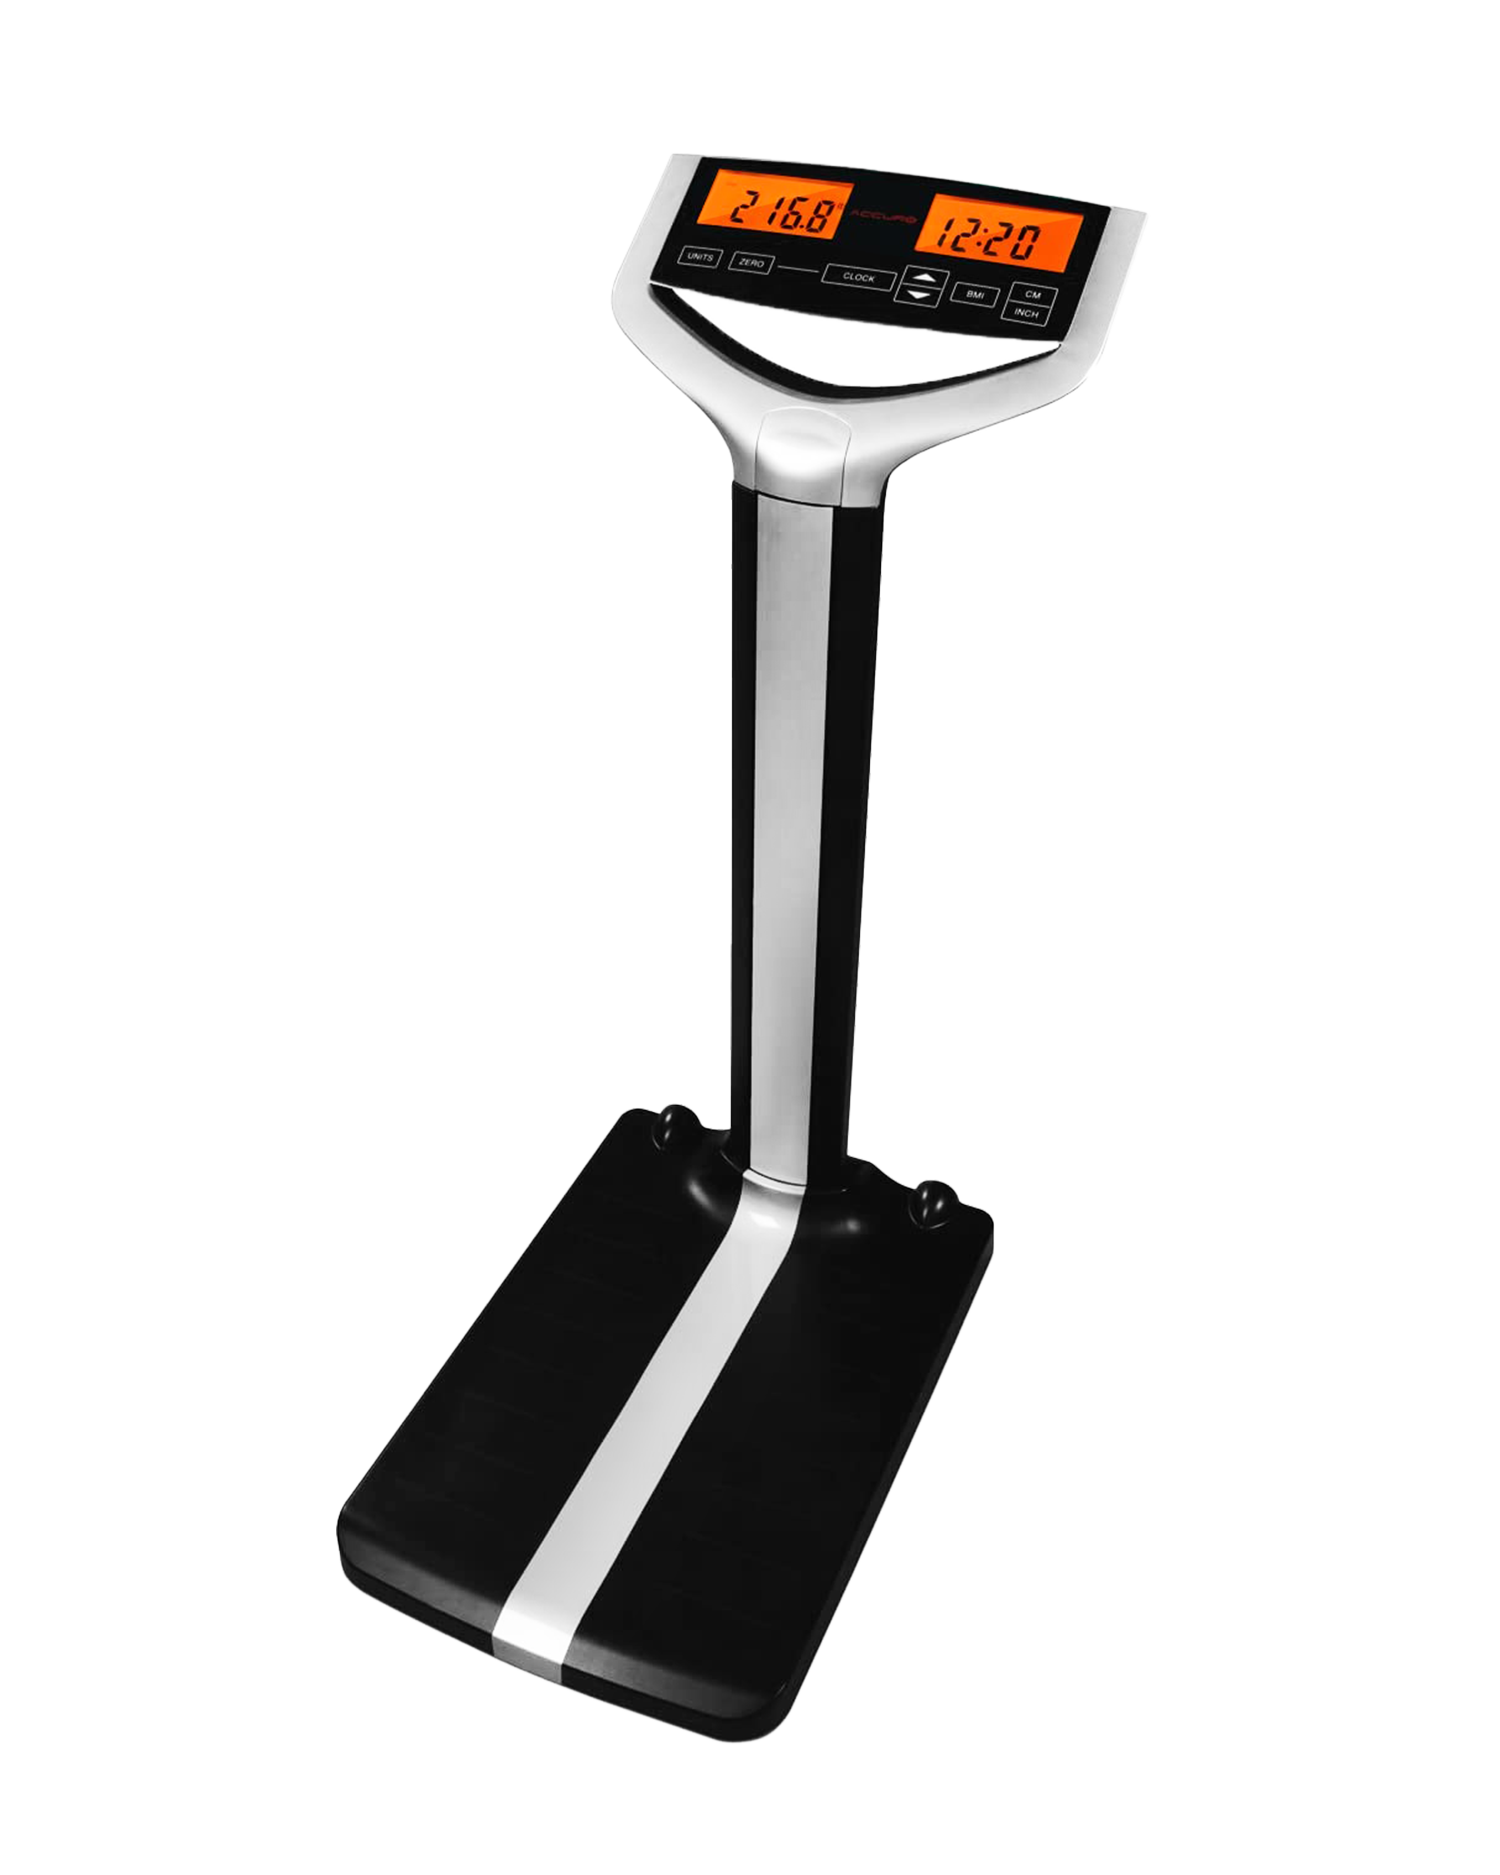 Accuro Waist Level Digital Scale with 500 lb Capacity and BMI Scale (DBW100)